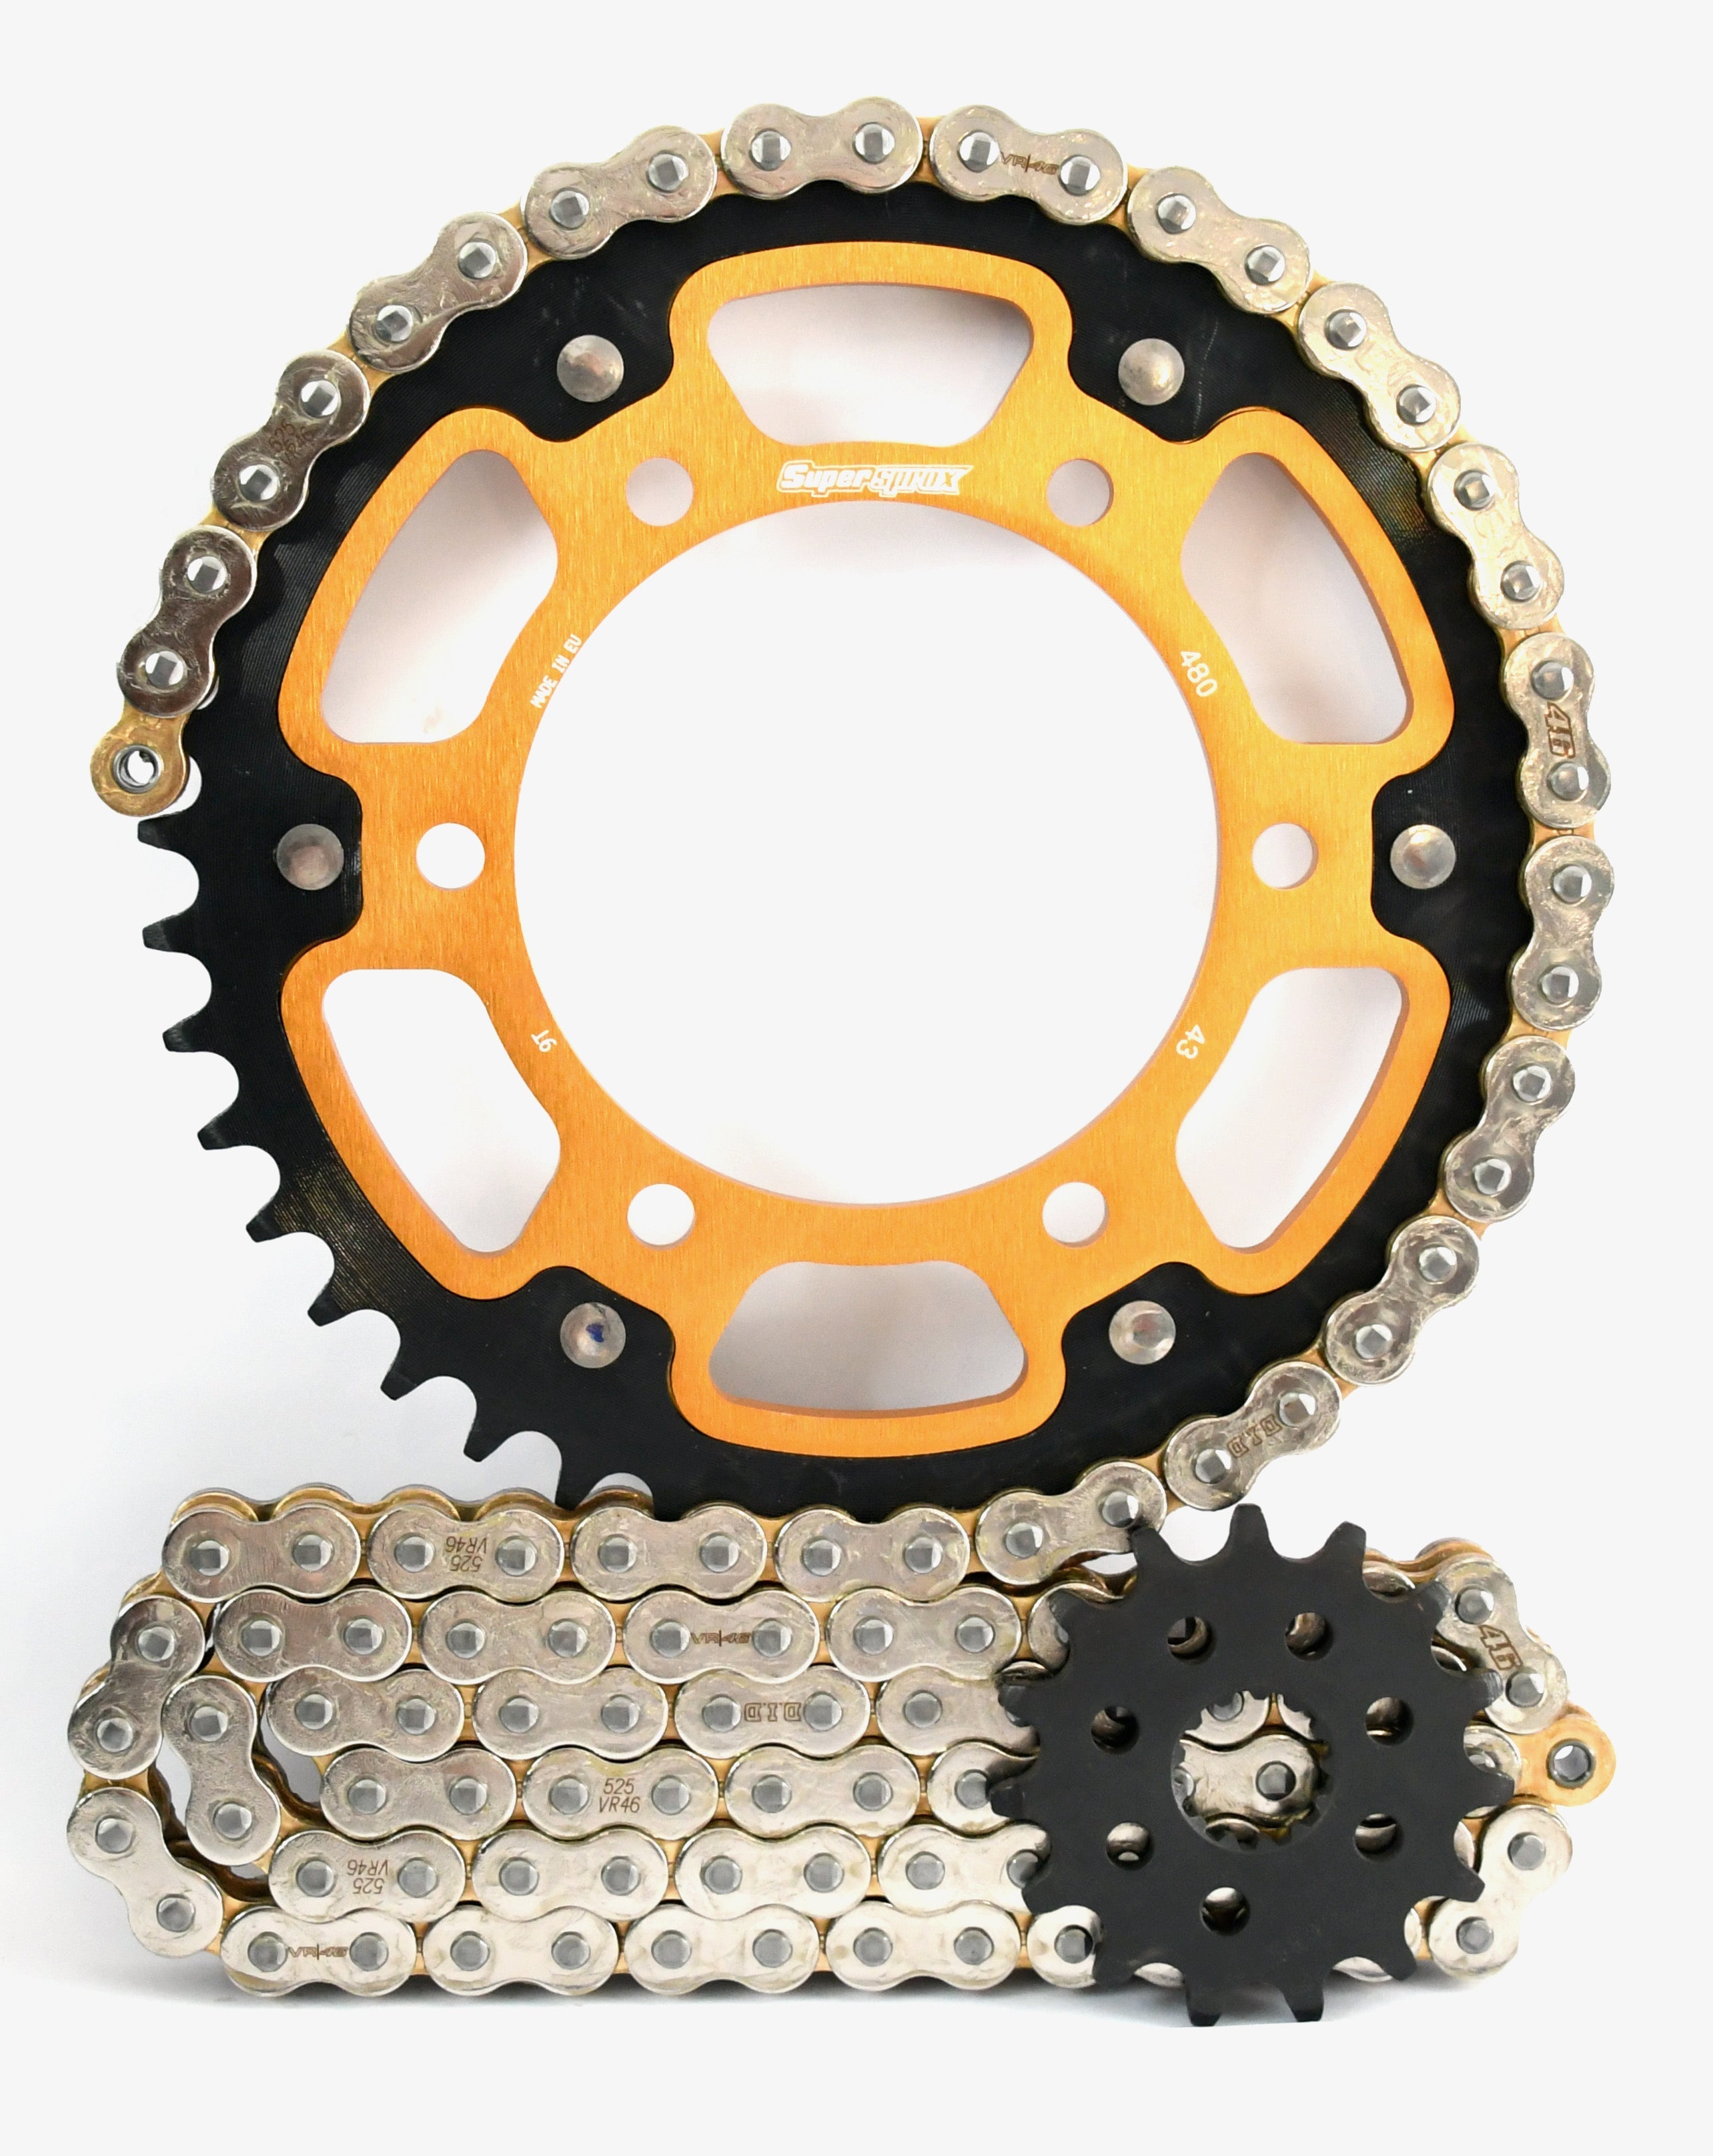 Supersprox 520 Conversion Chain and Sprocket Kit - BMW S1000RR & R 2009-2018 - Choose Your Gearing